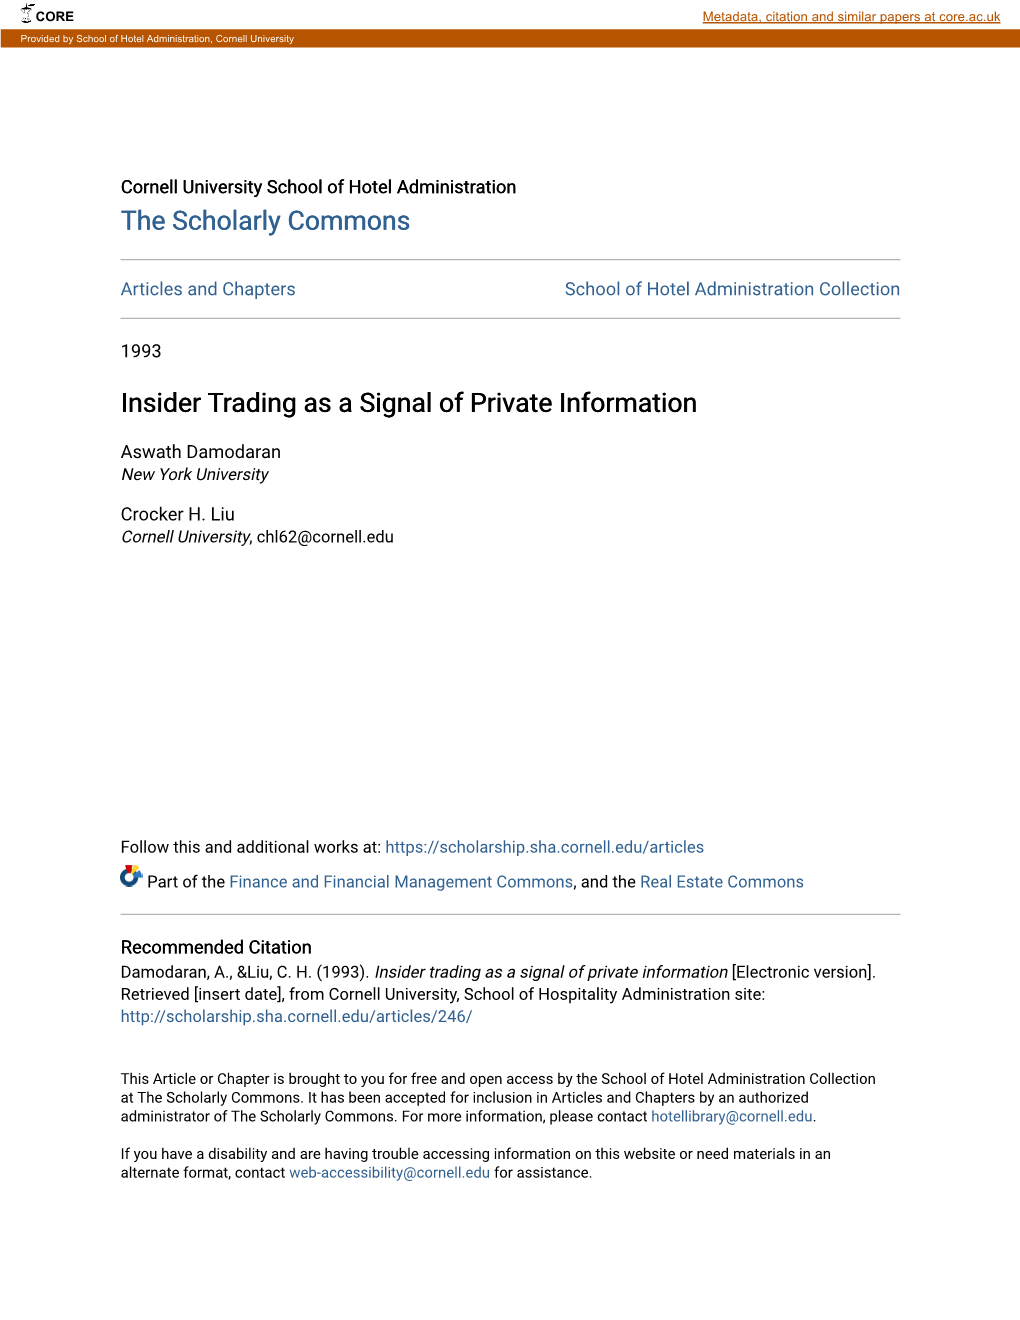 Insider Trading As a Signal of Private Information